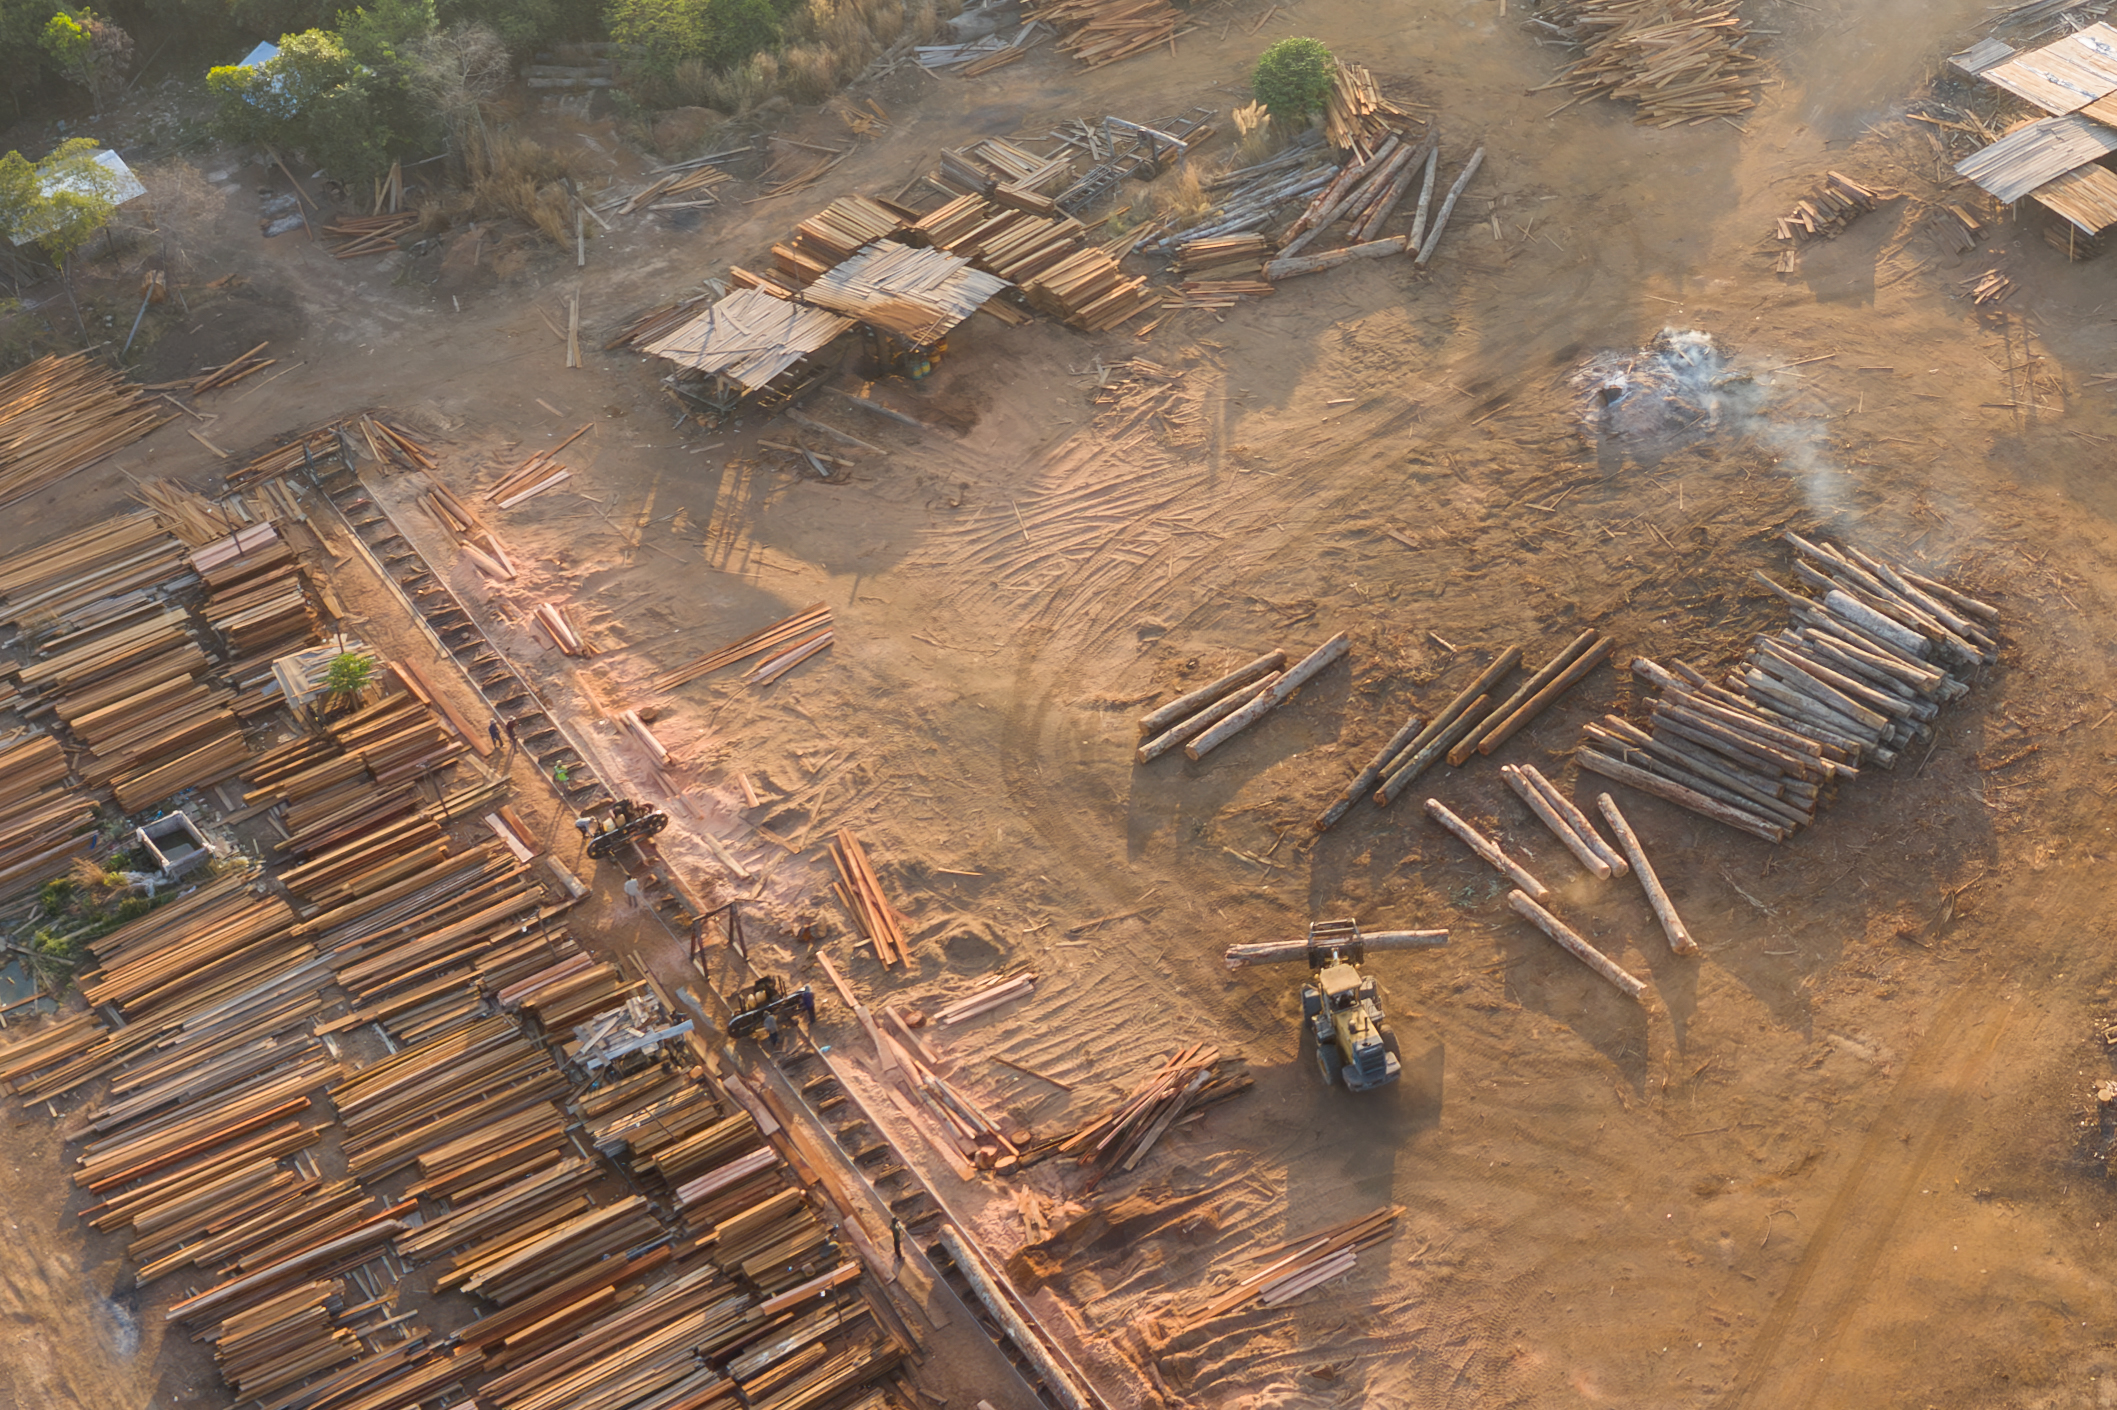 A sawmill seen operating within the Sal Sophea Peanich ELC in Stung Treng province. Workers were seen felling the remaining natural forest that occupied the ELC land in February 2023. Image by Andy Ball / Mongabay.